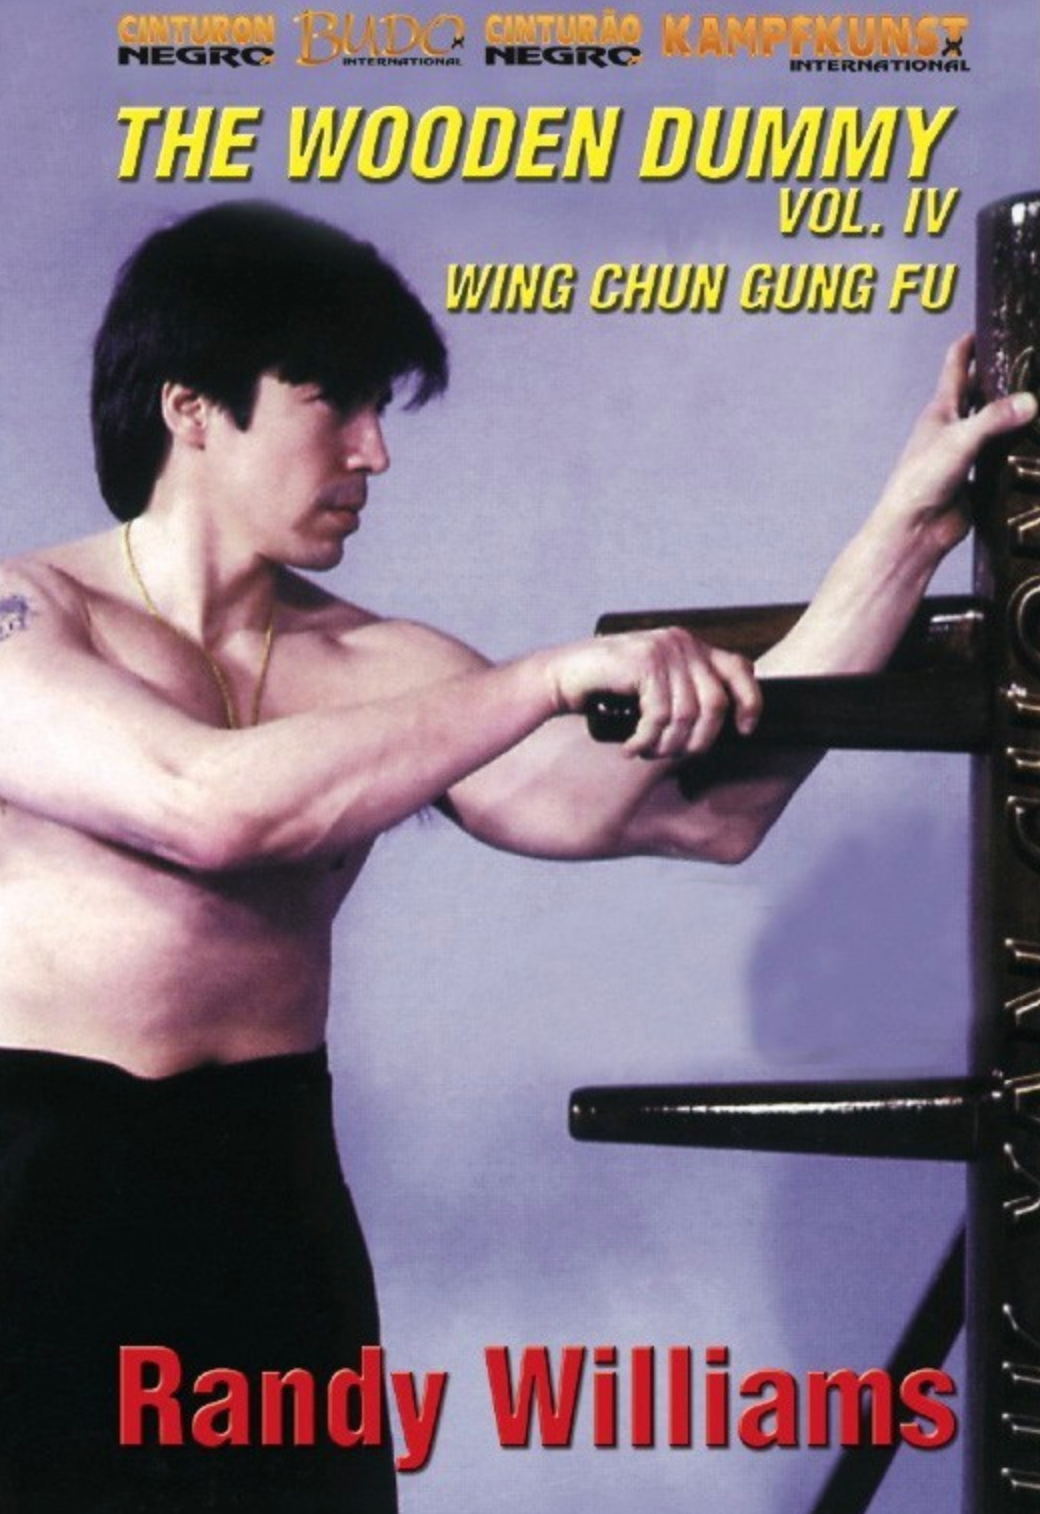 Wing Chun Wooden Dummy Form Part 4 DVD by Randy Williams - Budovideos Inc